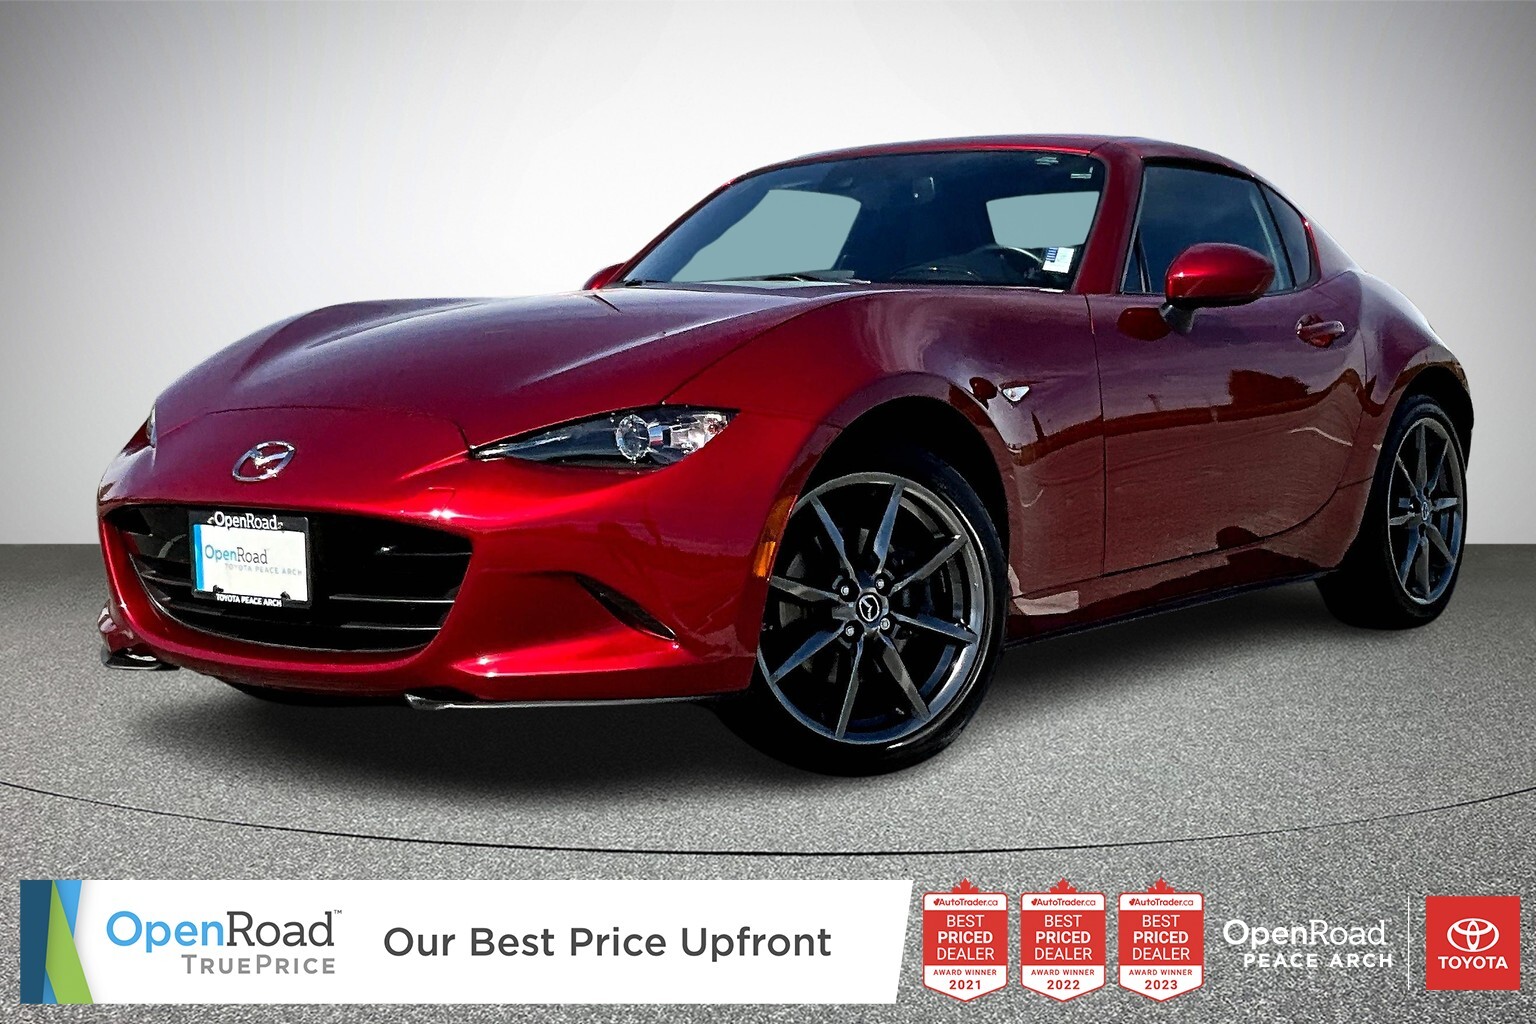 2019 Mazda MX-5 RF GT at Black Leather with Winter Tires on Rims